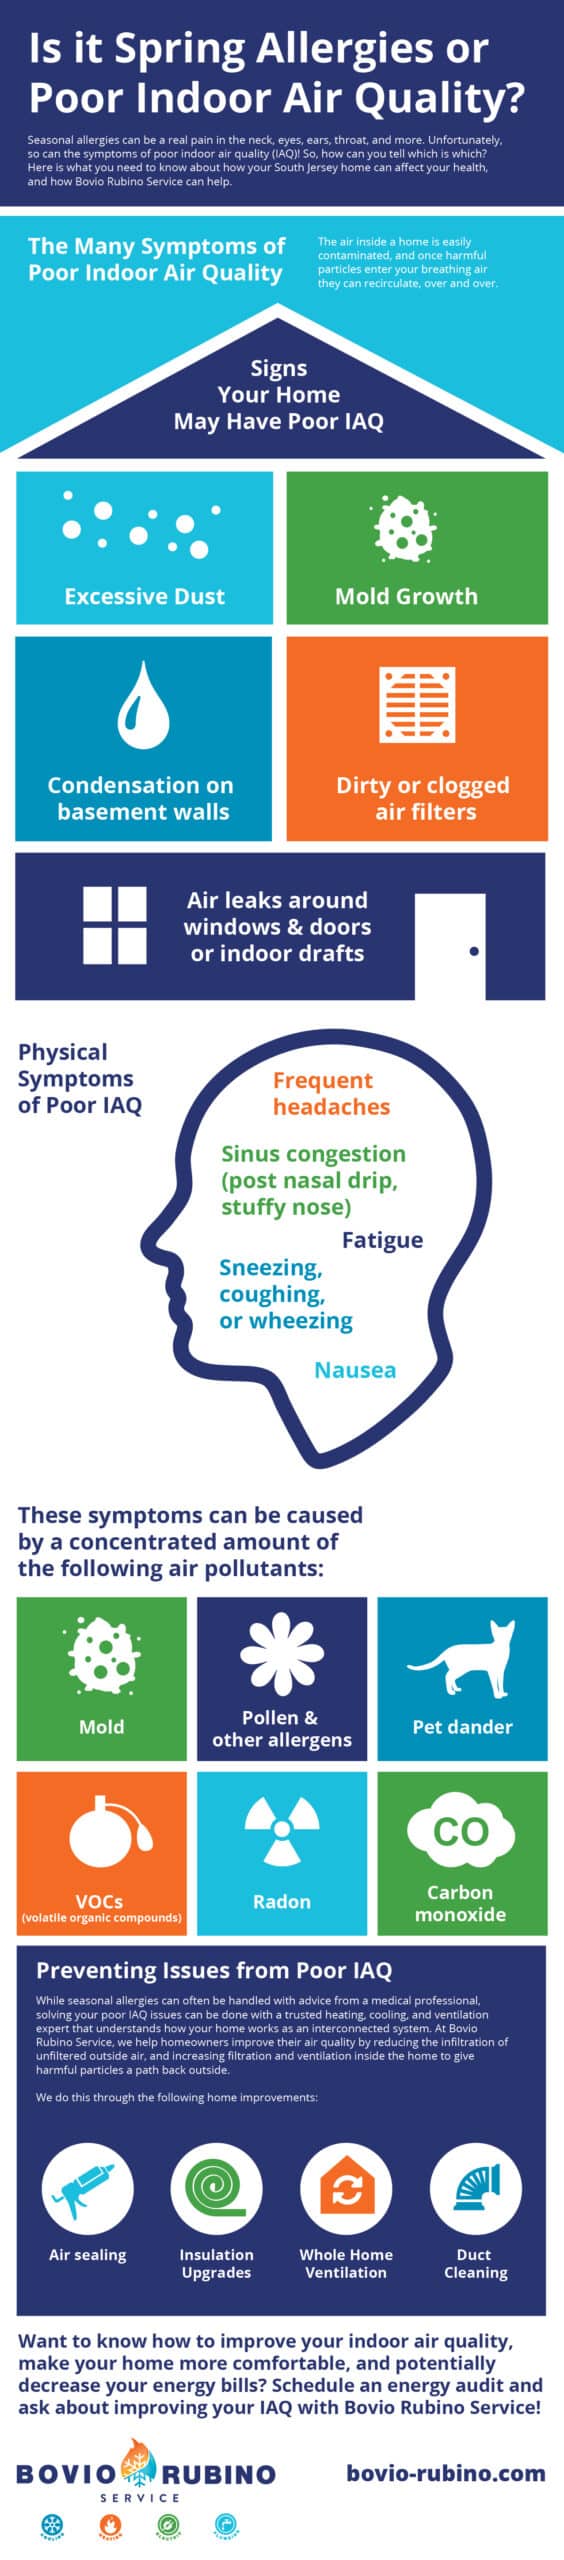 Is it Spring Allergies or Poor Indoor Air Quality? Infographic